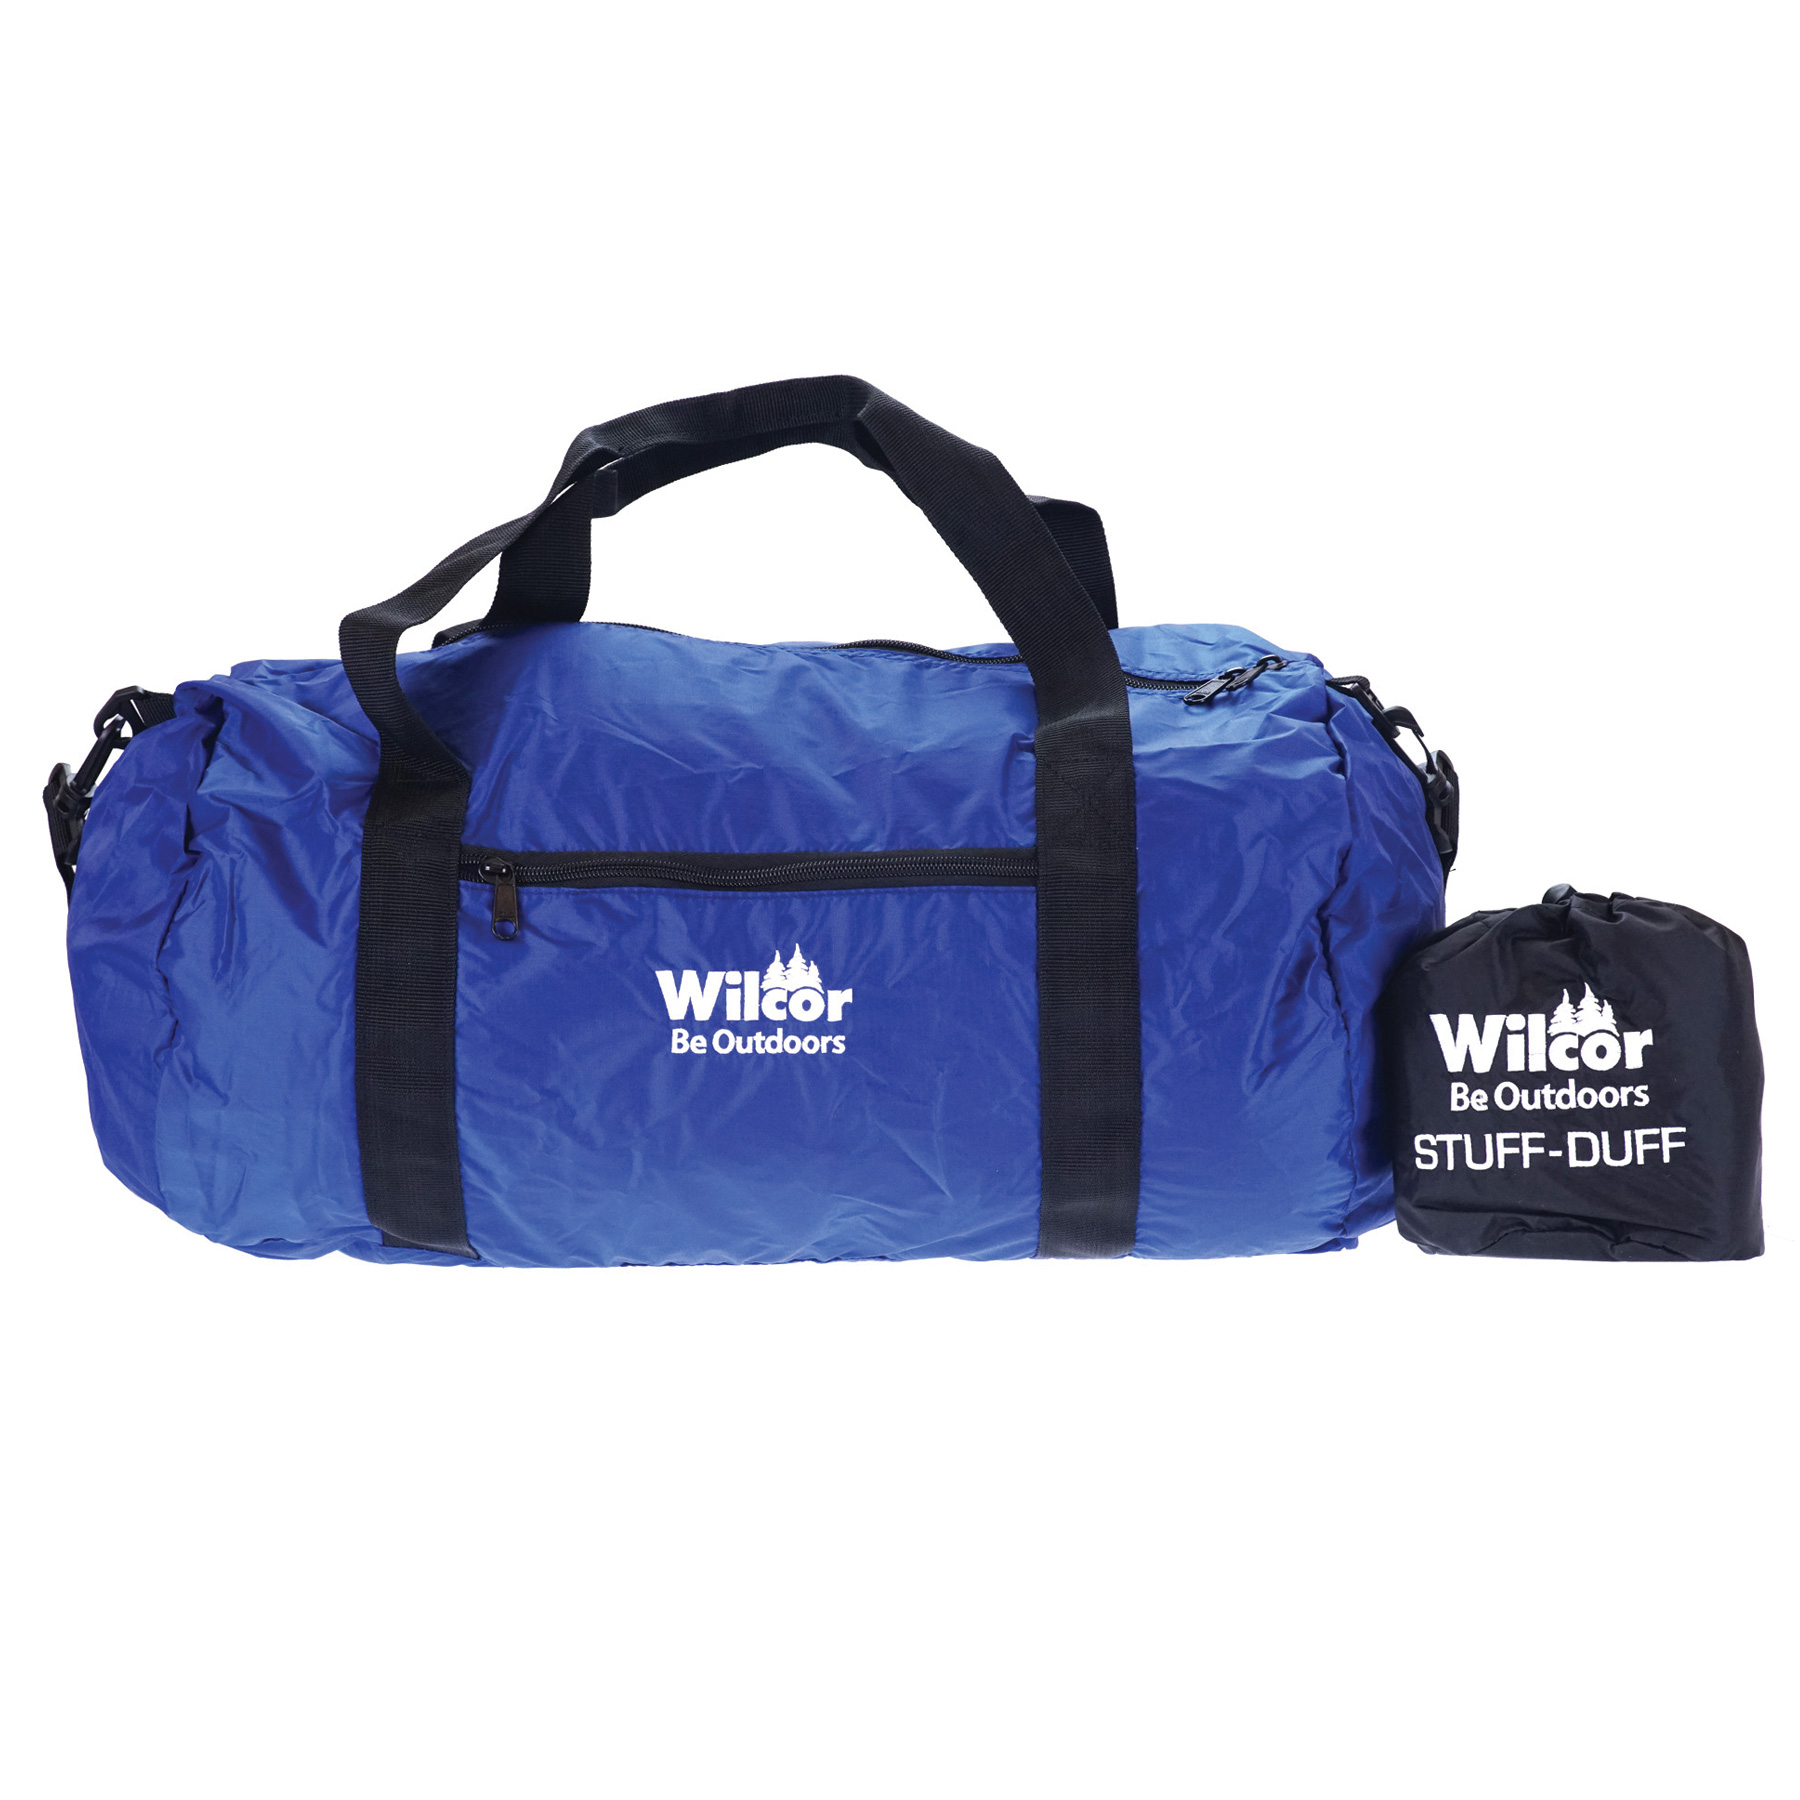 Wilcor International Wholesale Importer, Outdoor Gear,Camping